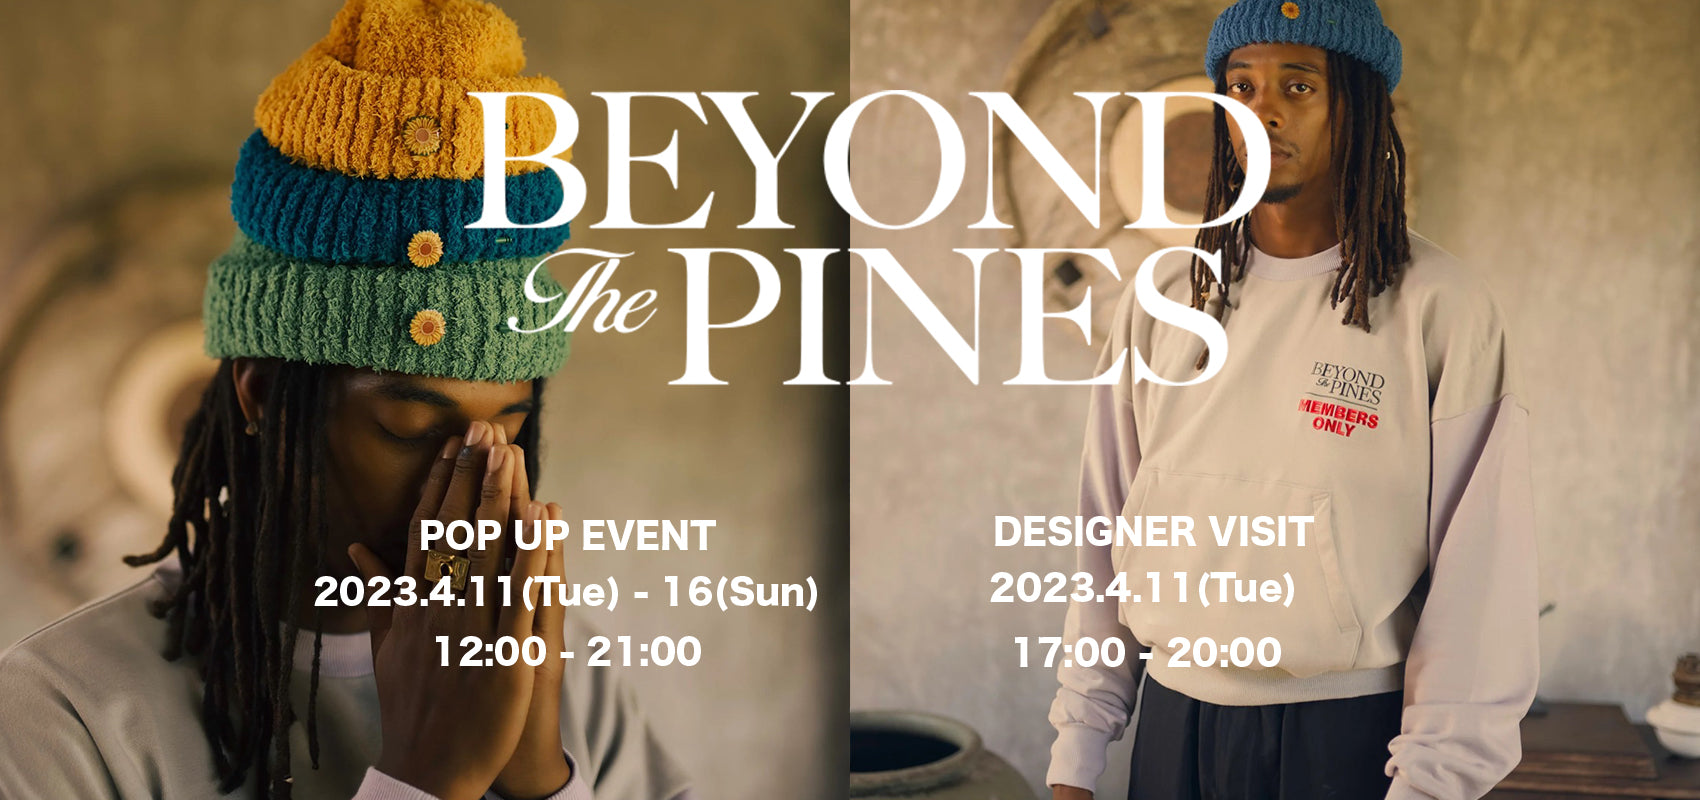 【BEYOND THE PINES MAGAZINE】POP UP EVENT